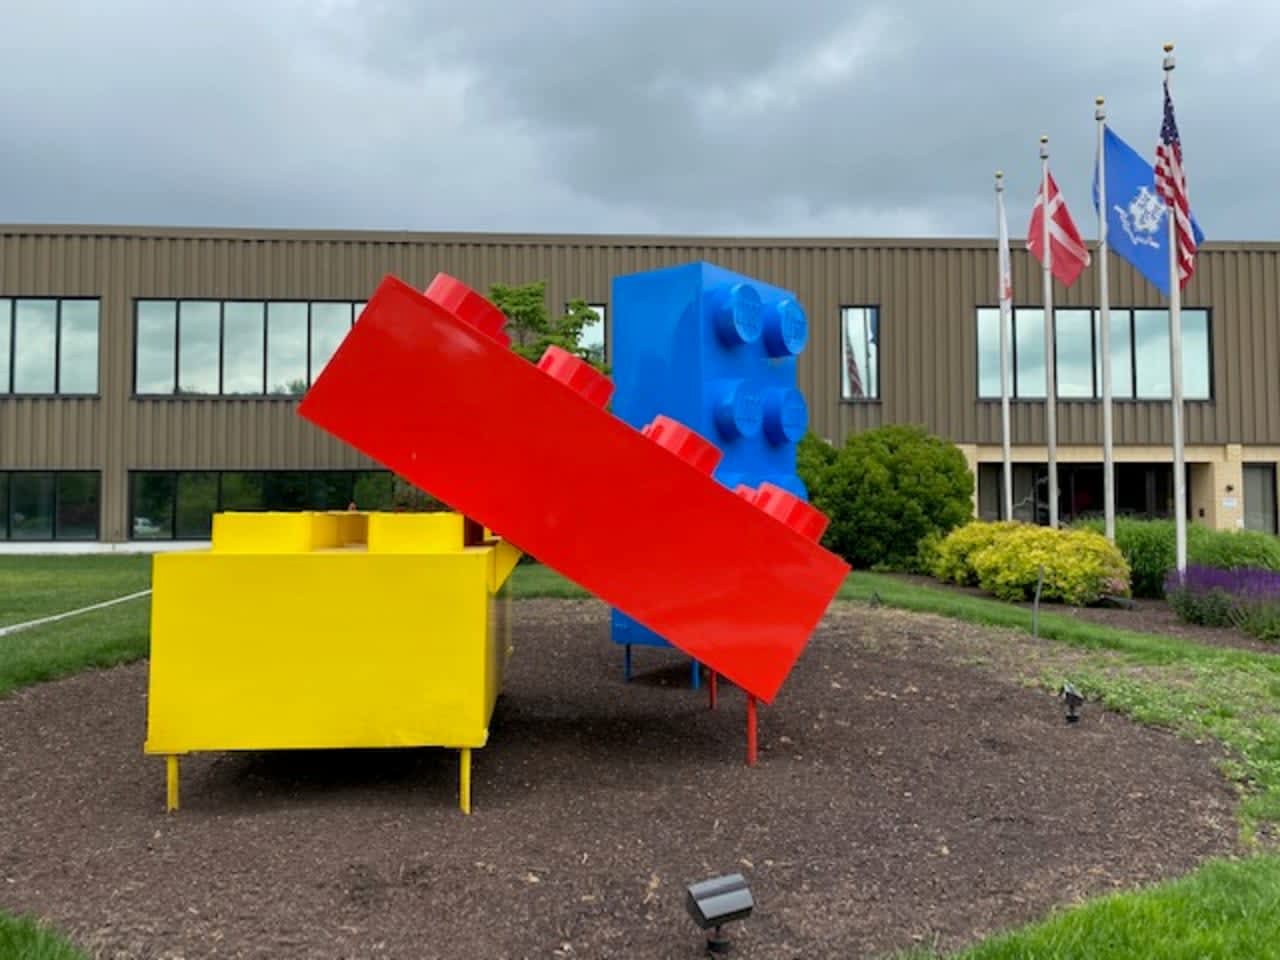 The outside of LEGO's Enfield office